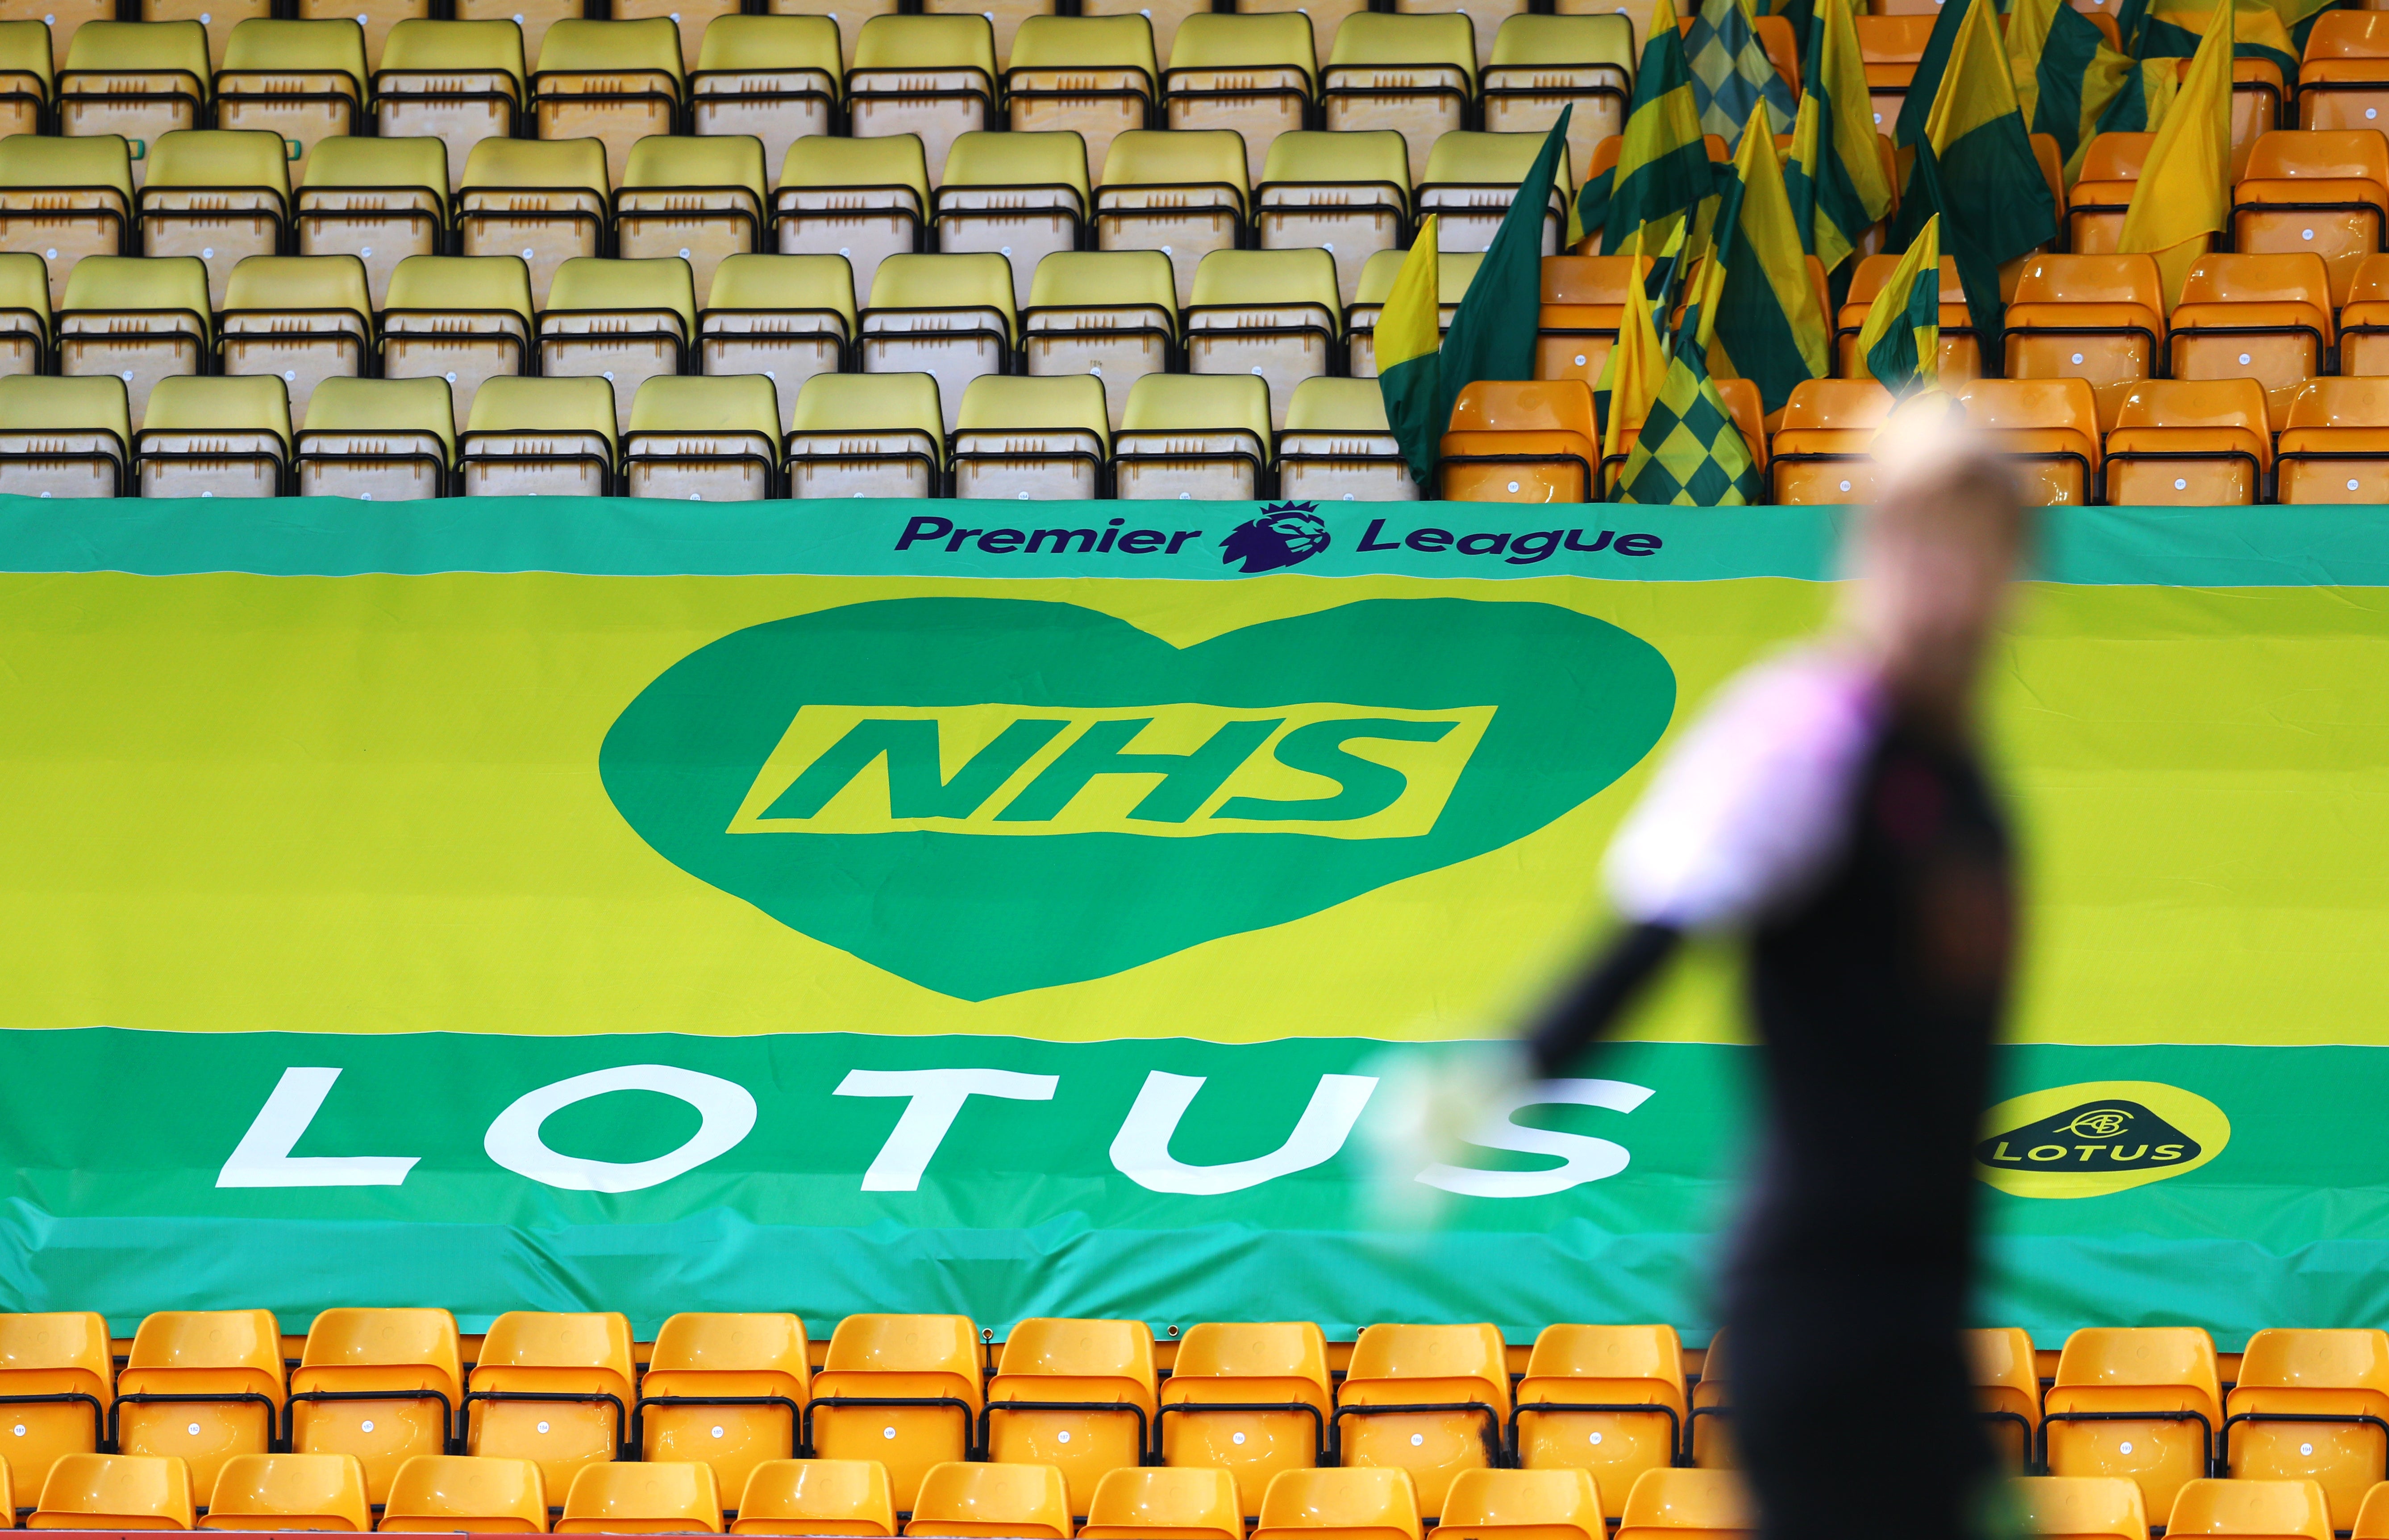 A general view of a NHS Lotus Premier League banner in the stands at Carrow Road